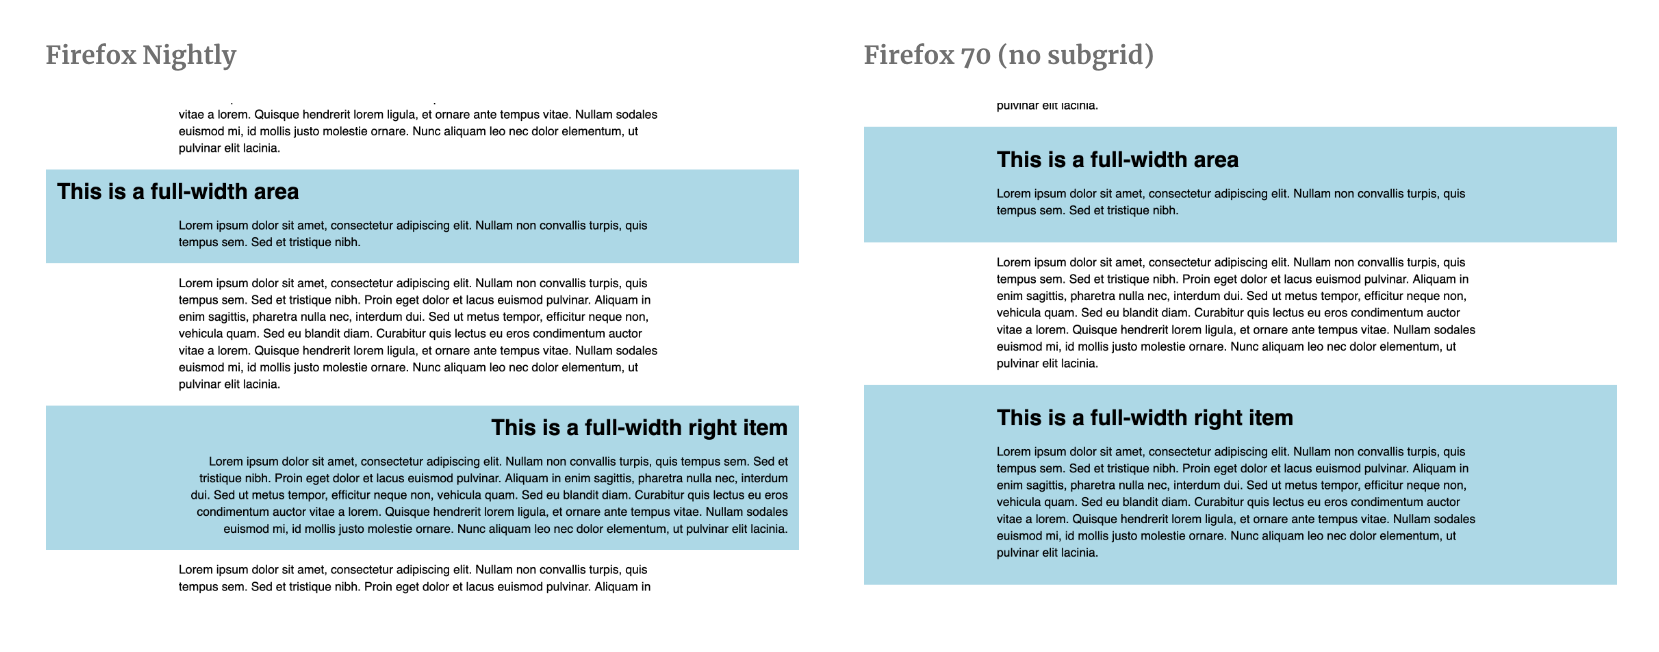 A comparison of Firefox Nightly vs Firefox 70 and how this support query looks